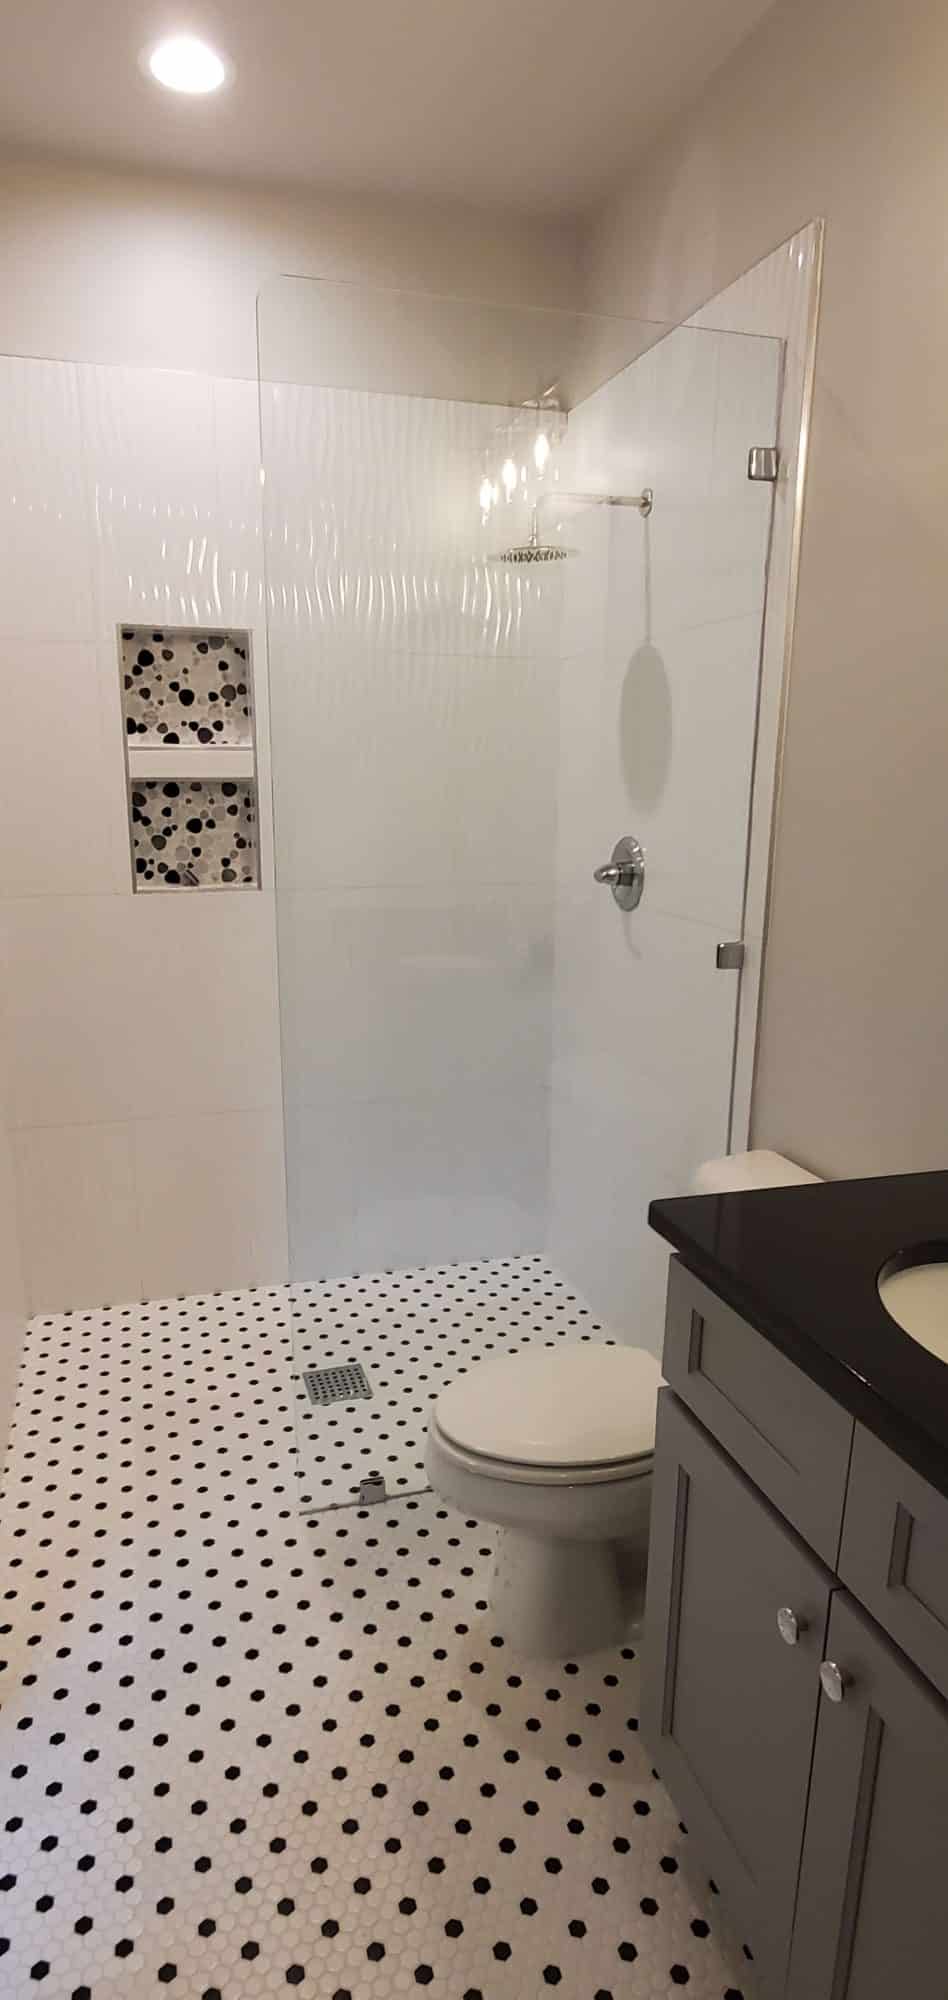 raleigh off campus apartments marcom st off campus apartments near nc state university private bathroom glass walk in shower